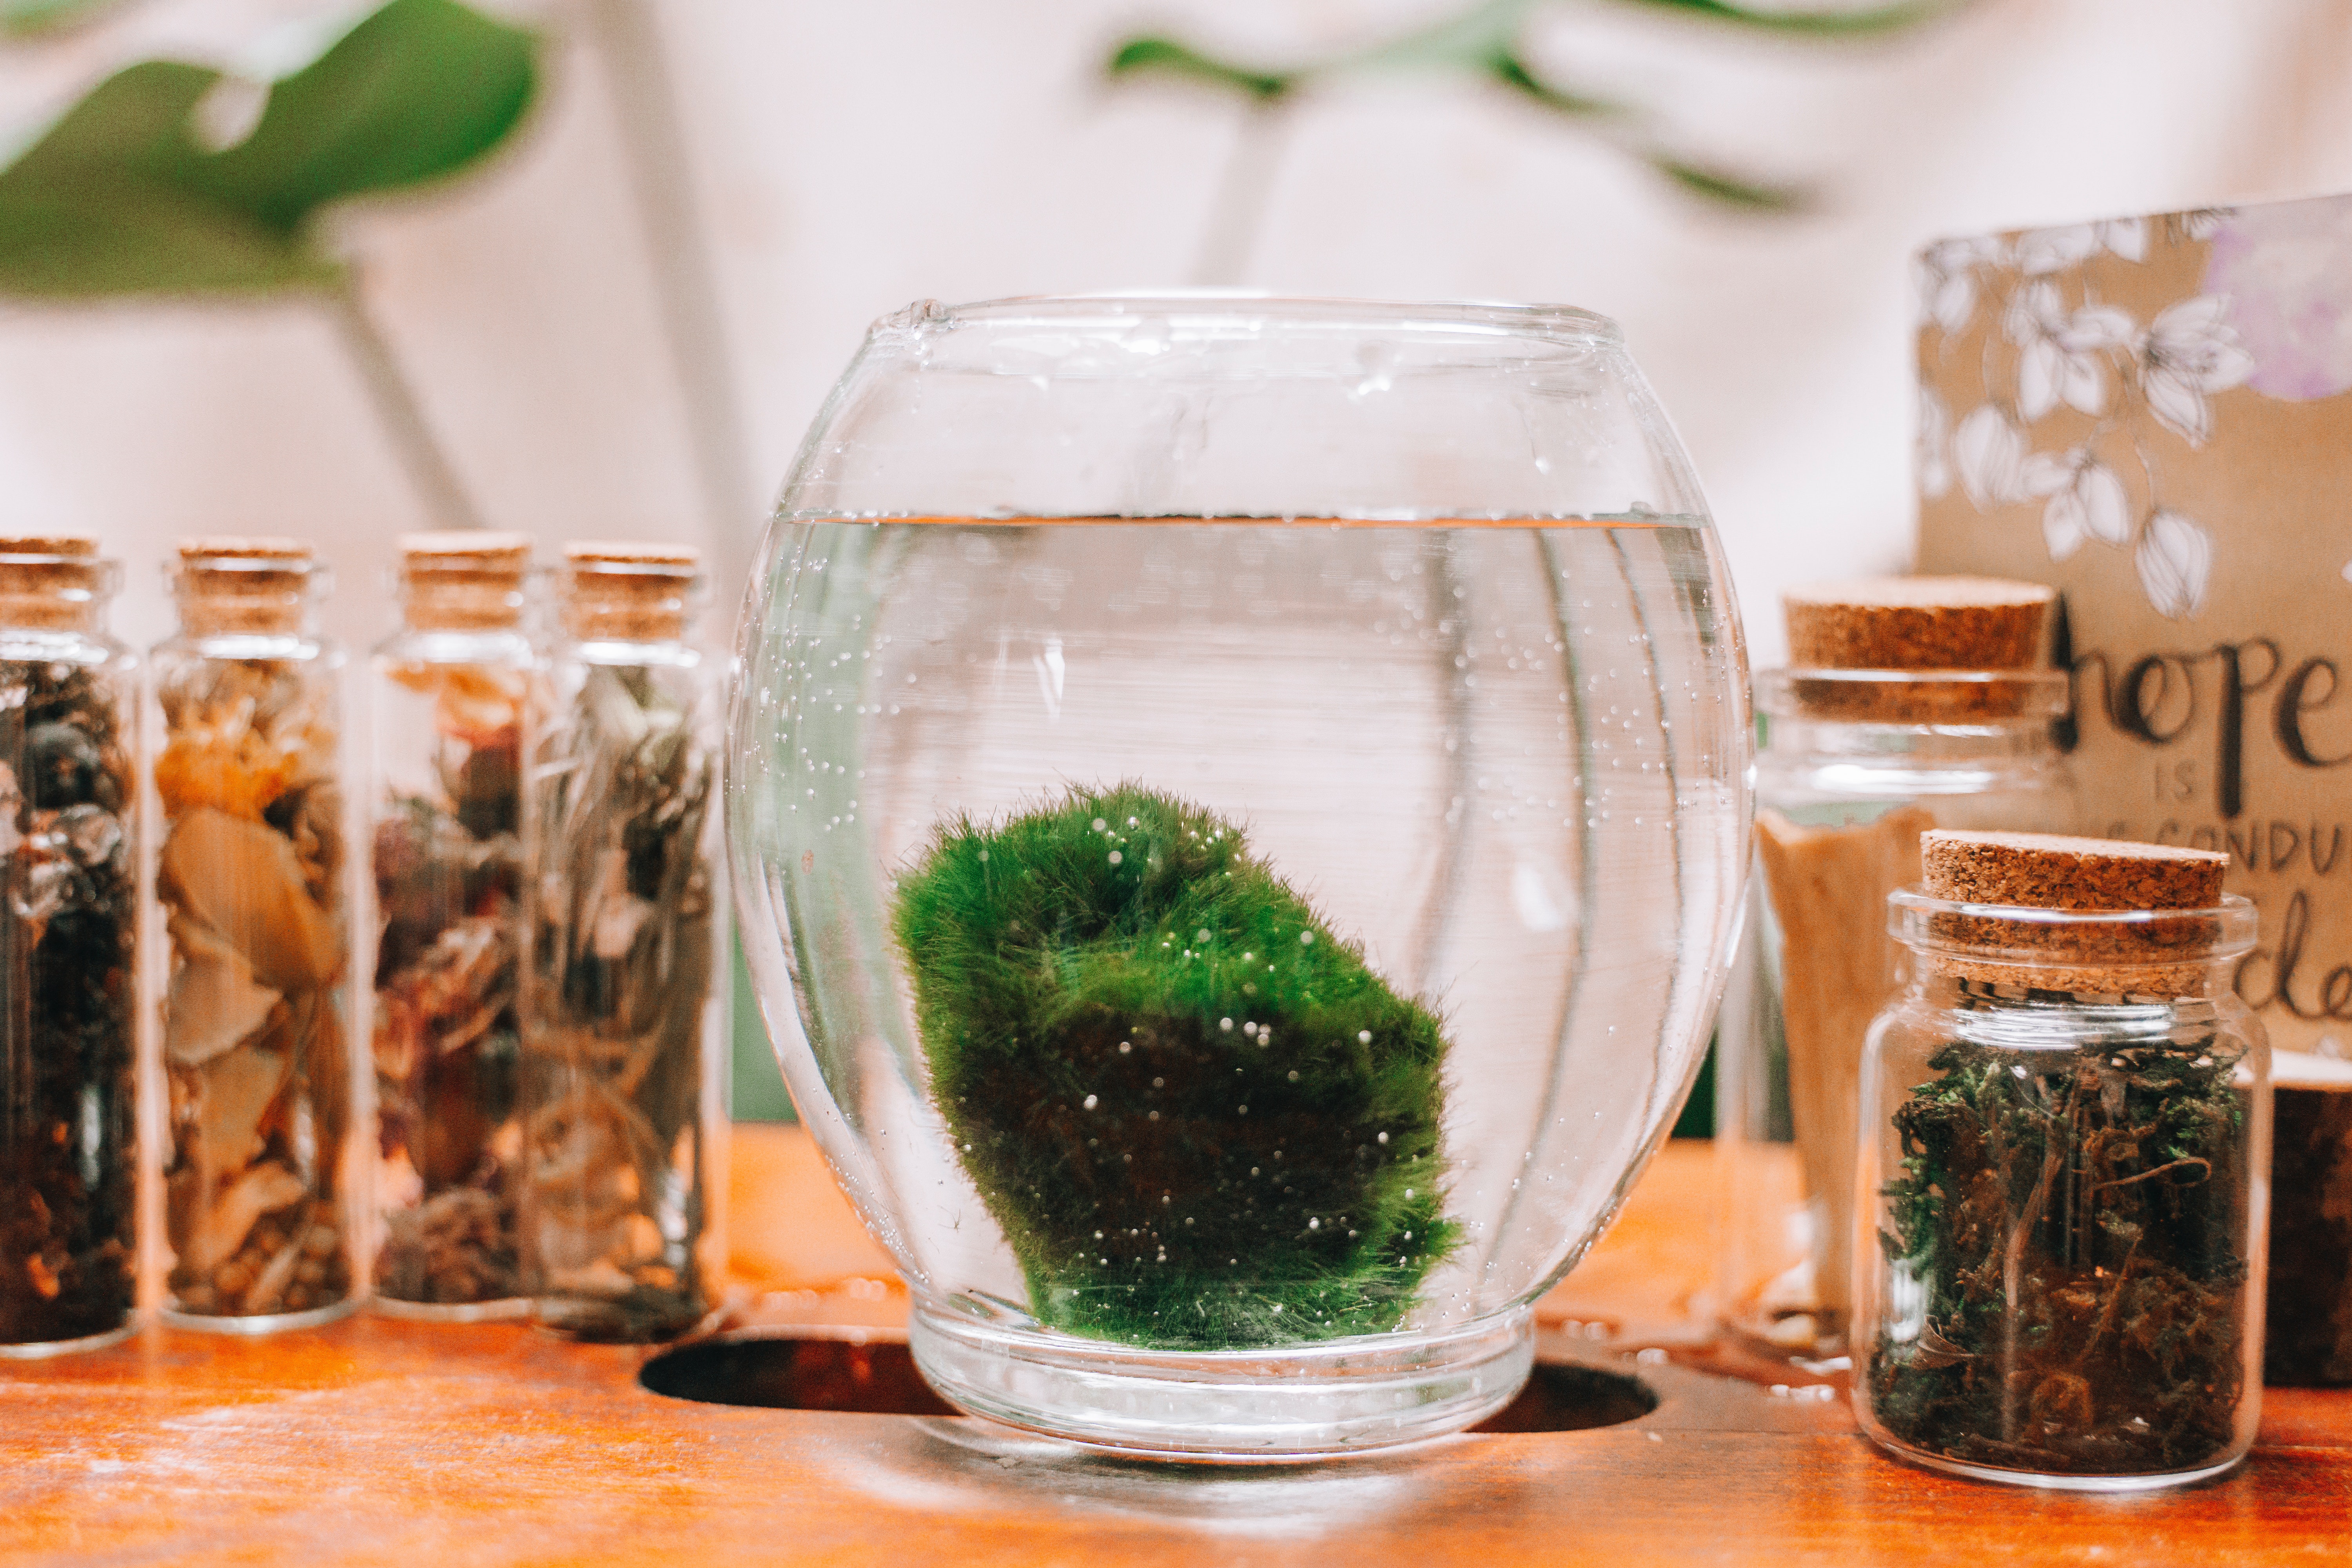 moss ball in a glass bowl surrounded by bottles filled with objects